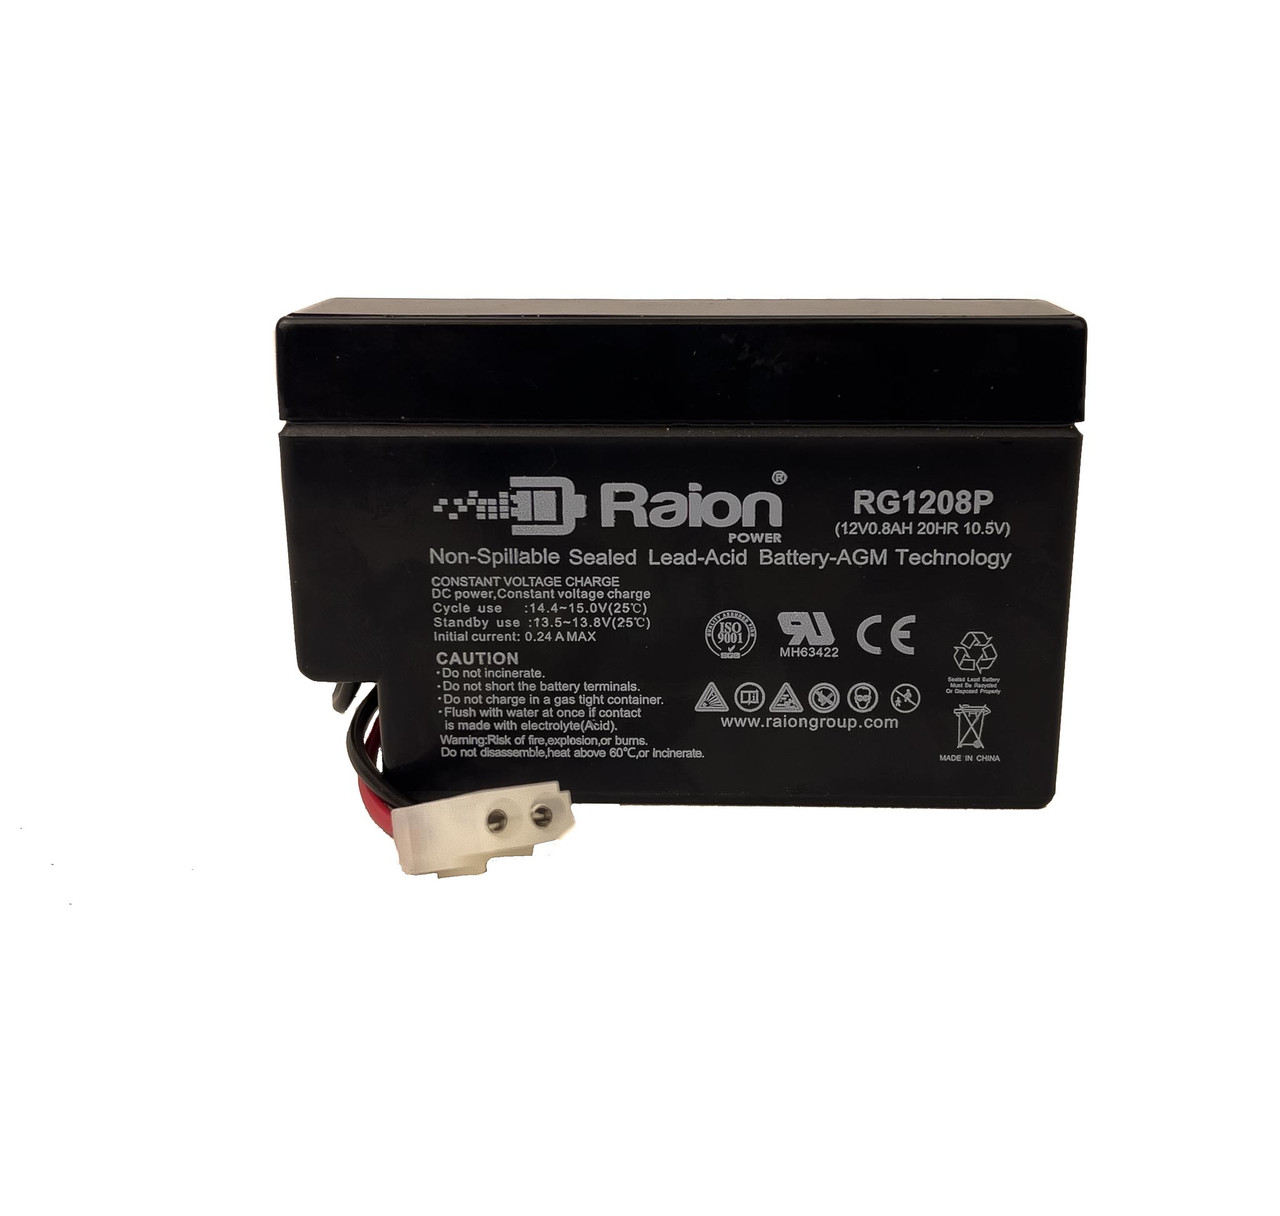 Raion Power 12V 0.8Ah SLA Battery With T1 Terminals For Hill-Rom 4190200021S